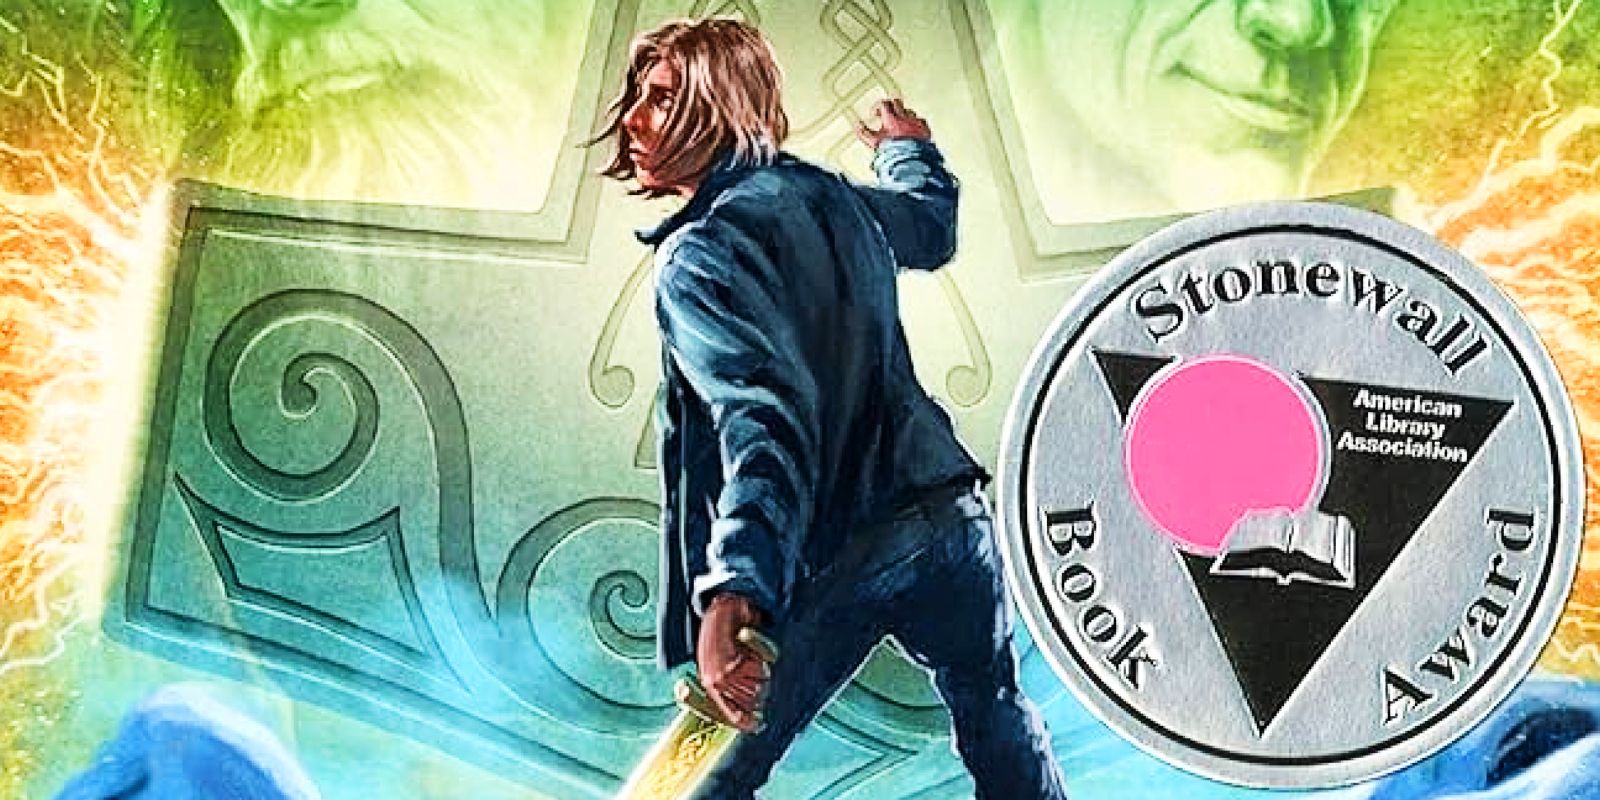 Disney’s Percy Jackson TV Show Could Fix Its LGBTQ+ Representation By Including This Gods Of Asgard Character